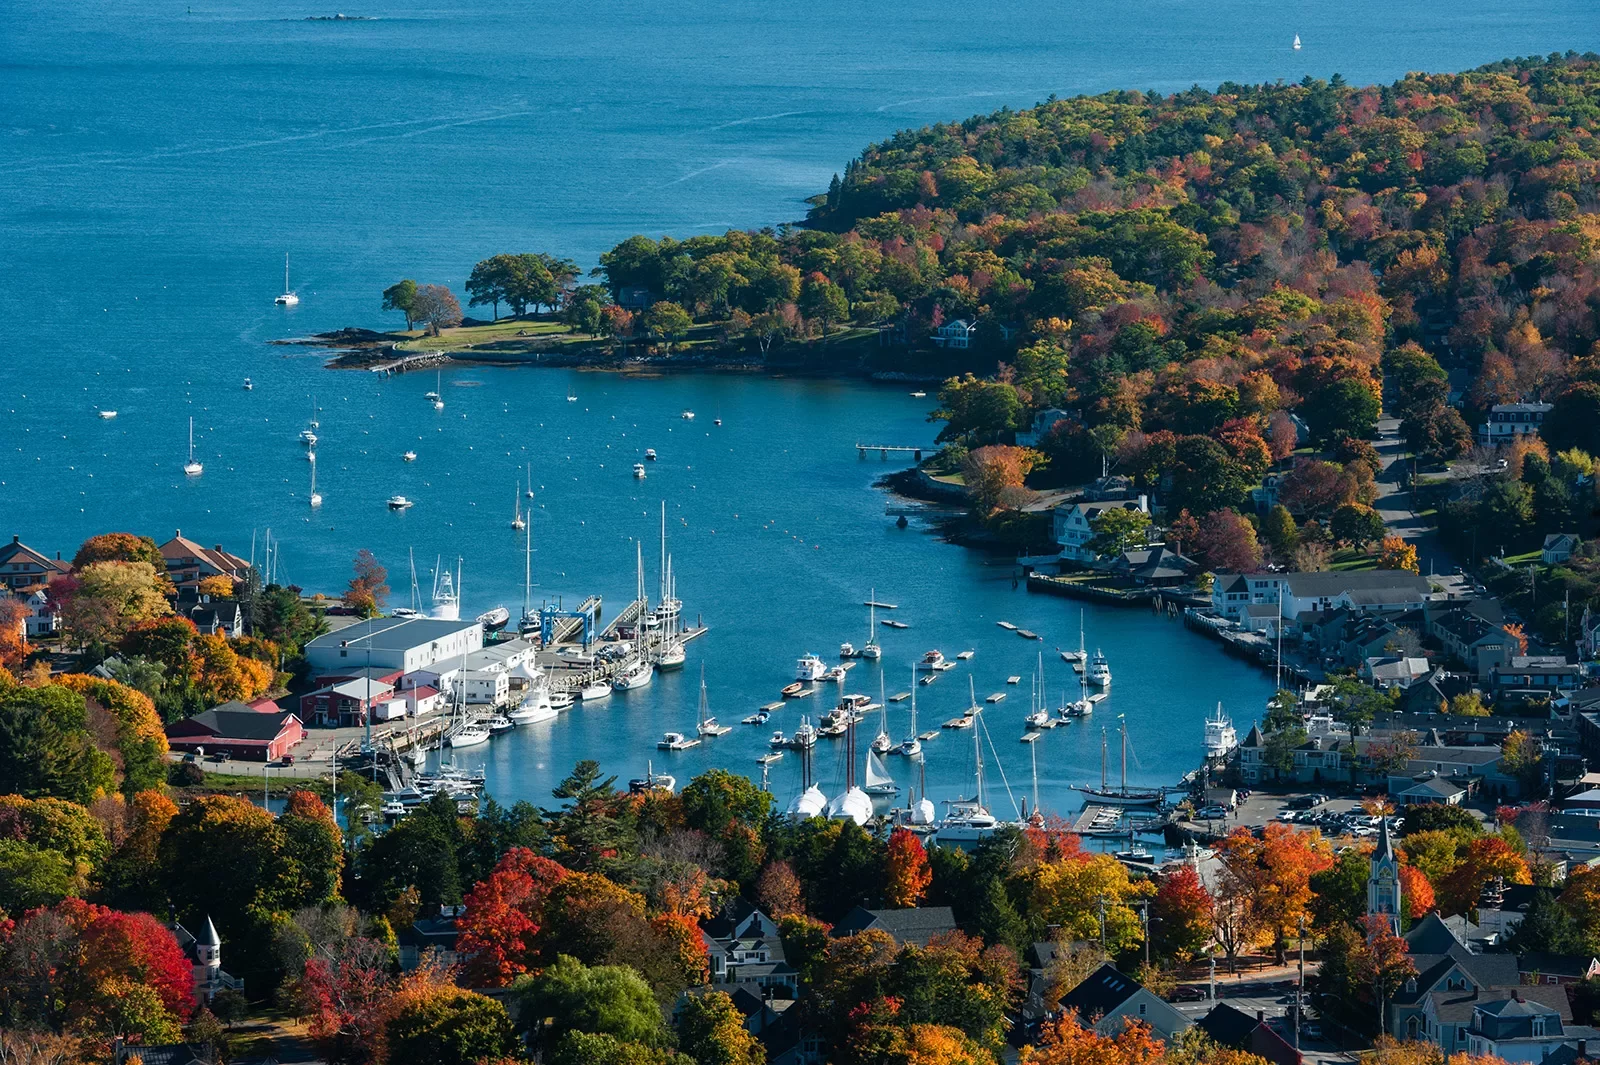 Wide shot of port and numerous small boats around autumnal forest.